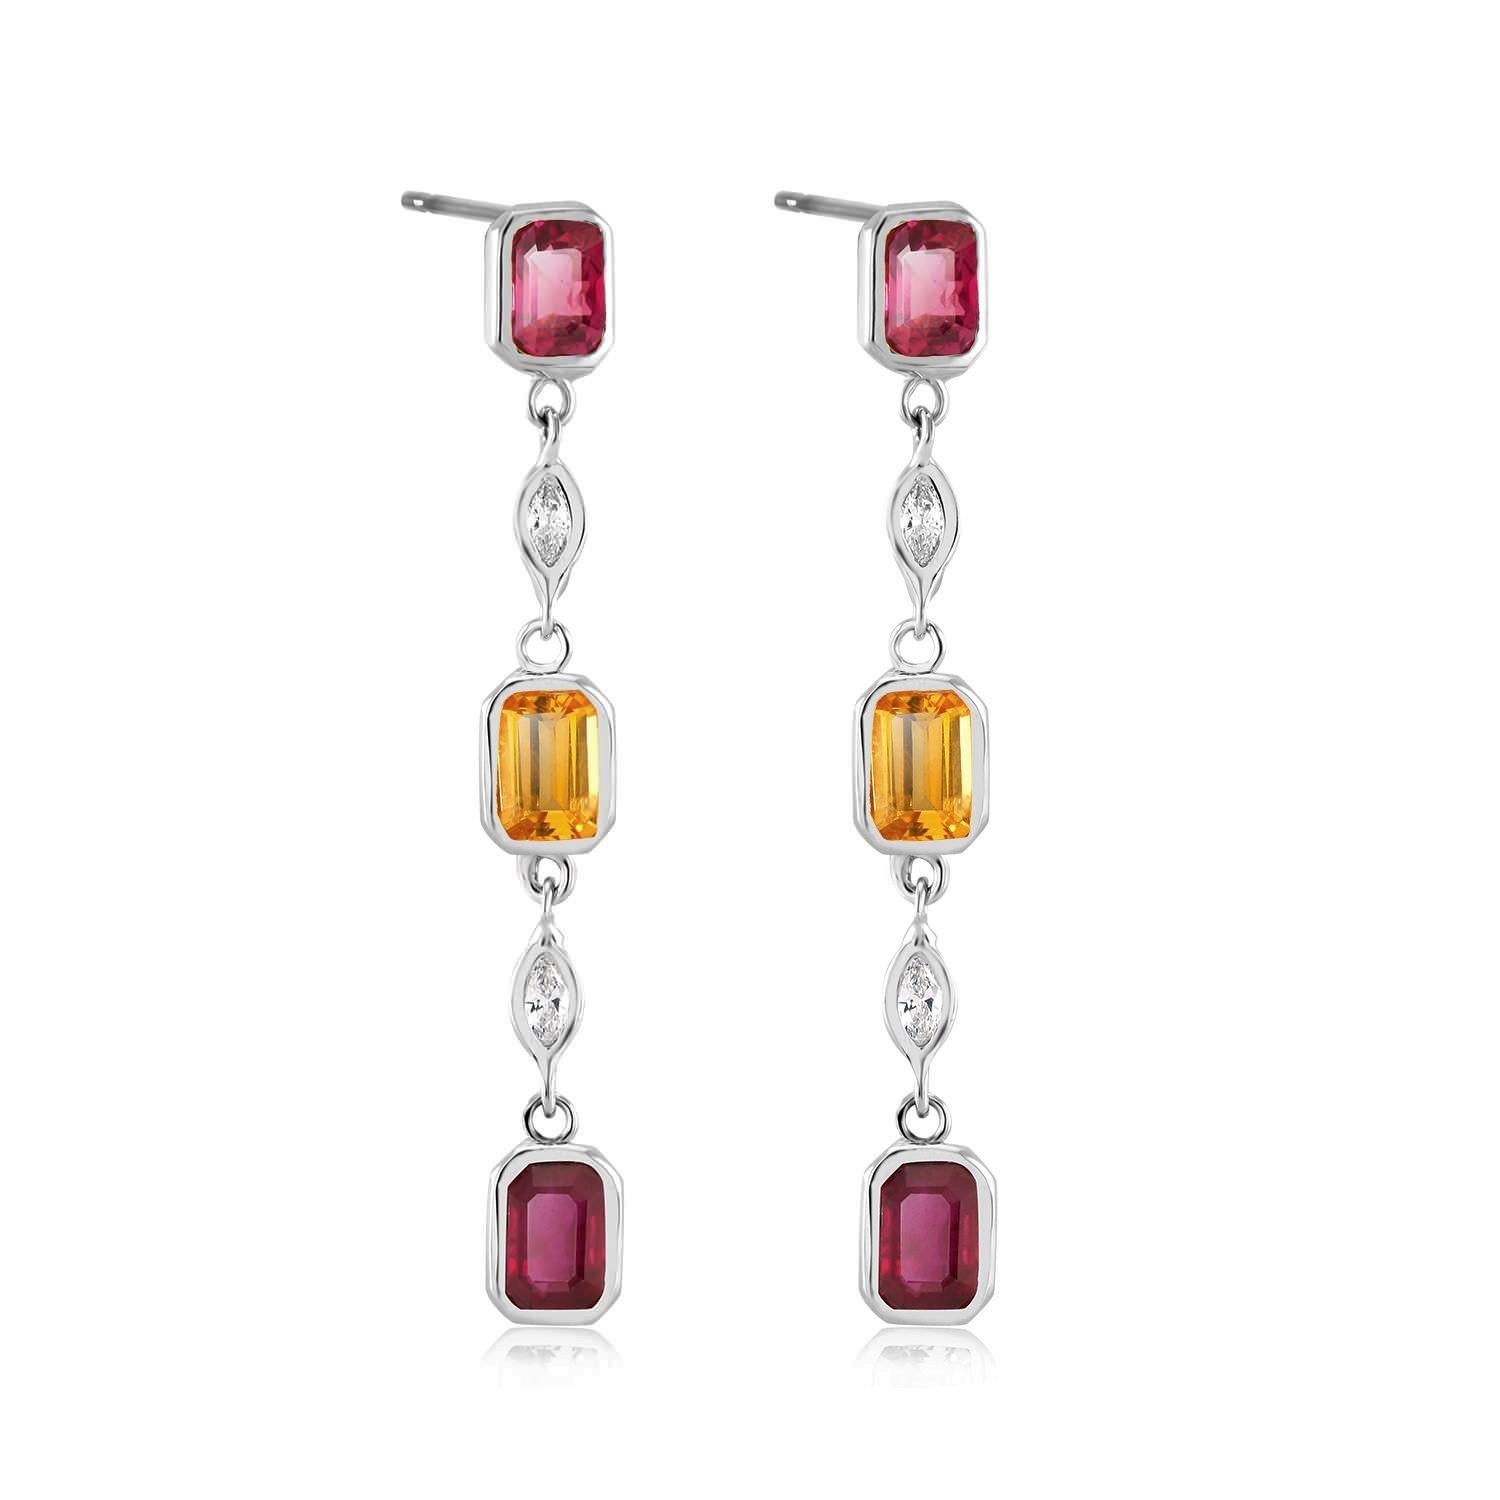 Contemporary Ruby Yellow Sapphire Marquise Diamond Drop Earrings Weighing 3.65 Carat